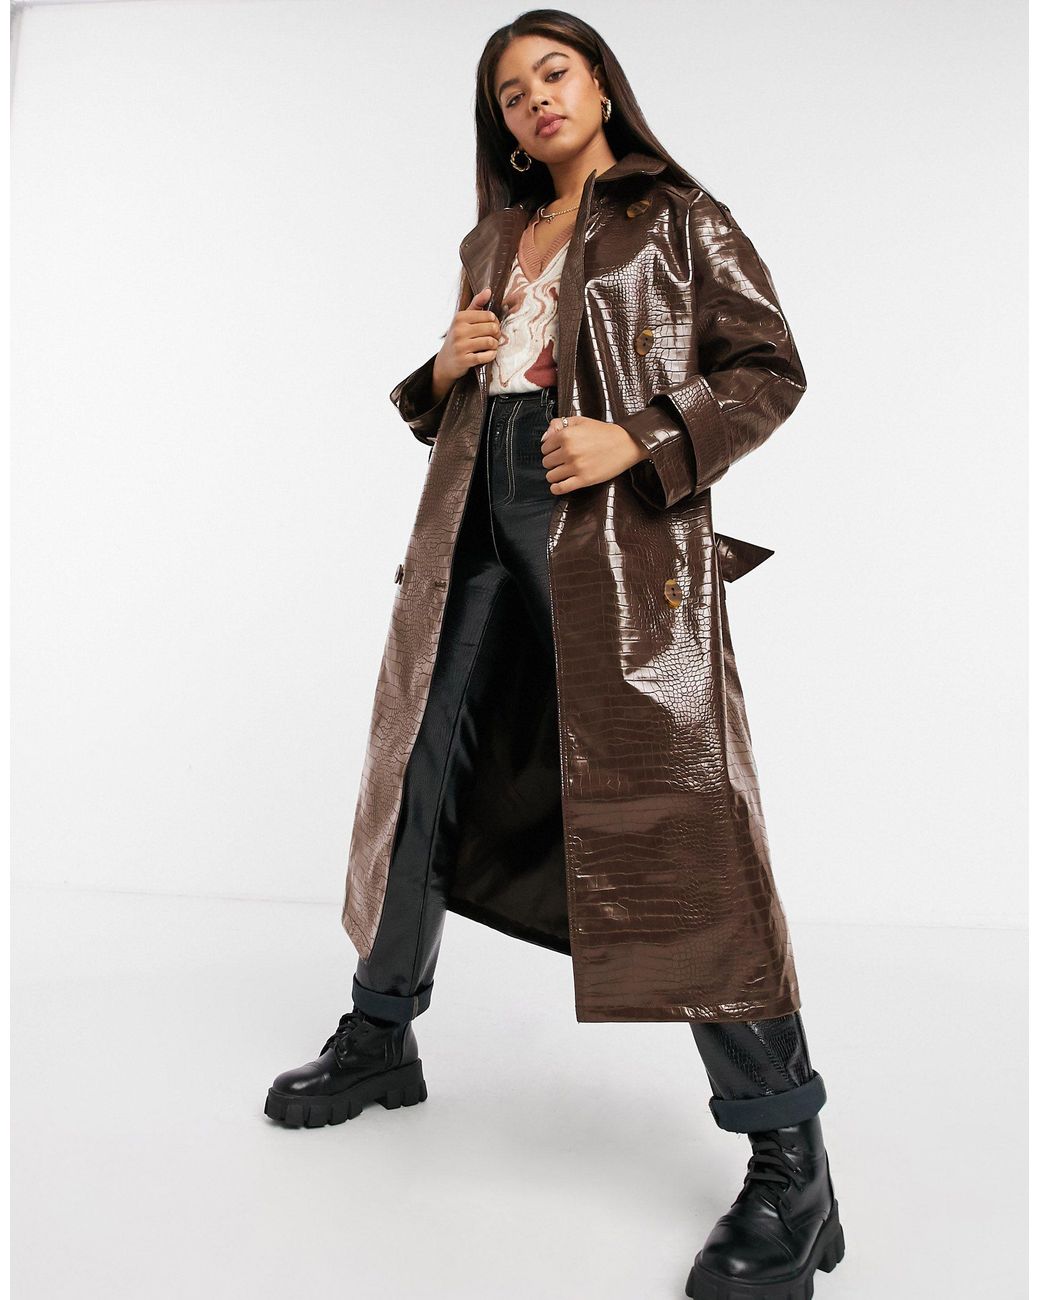 Black Croc Faux Leather Oversized Double Breasted Trench Coat